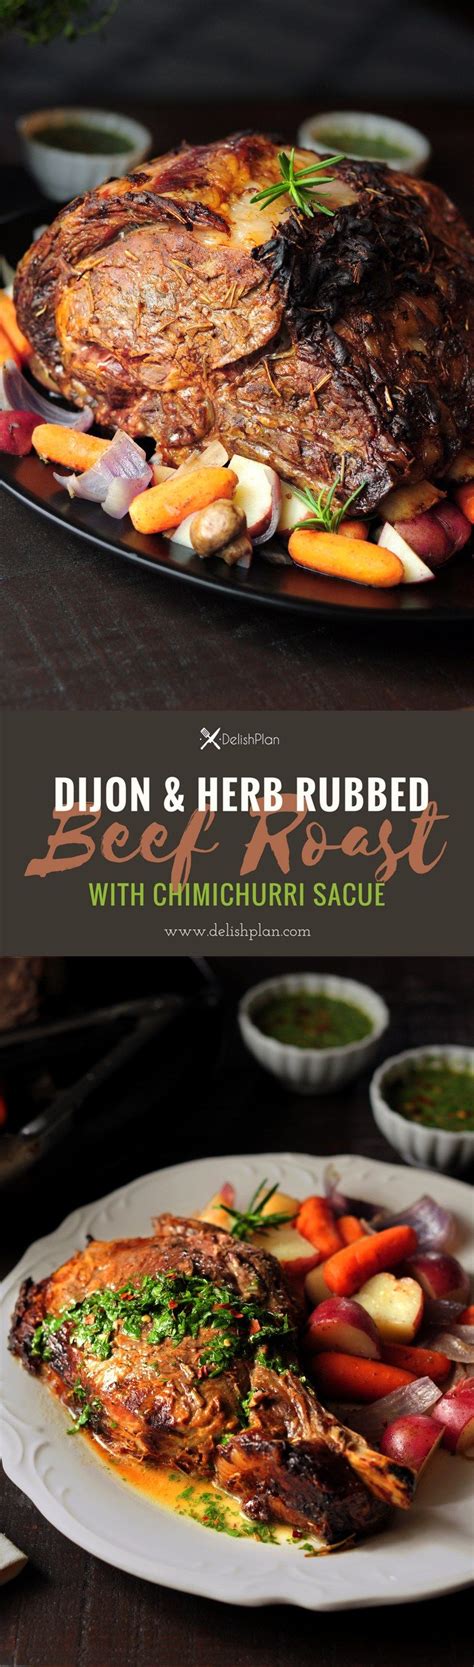 It's so easy (true!) and turns out incredibly delicious every single time. Dijon & Herb Rubbed Rib Roast with Chimichurri Sauce ...